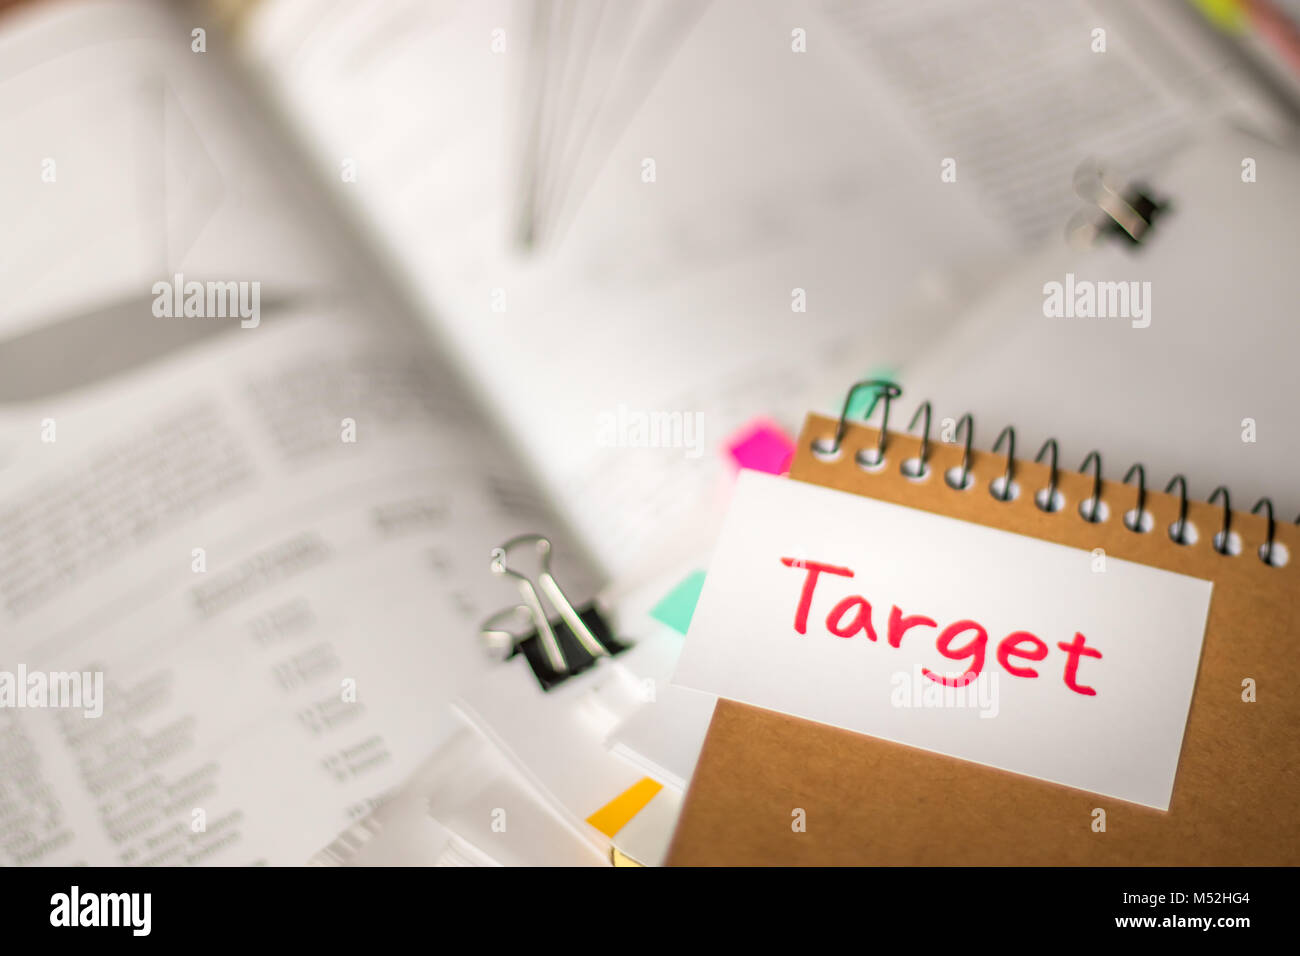 Target; Stack of Documents with Large Amount of Analytic Material. Stock Photo